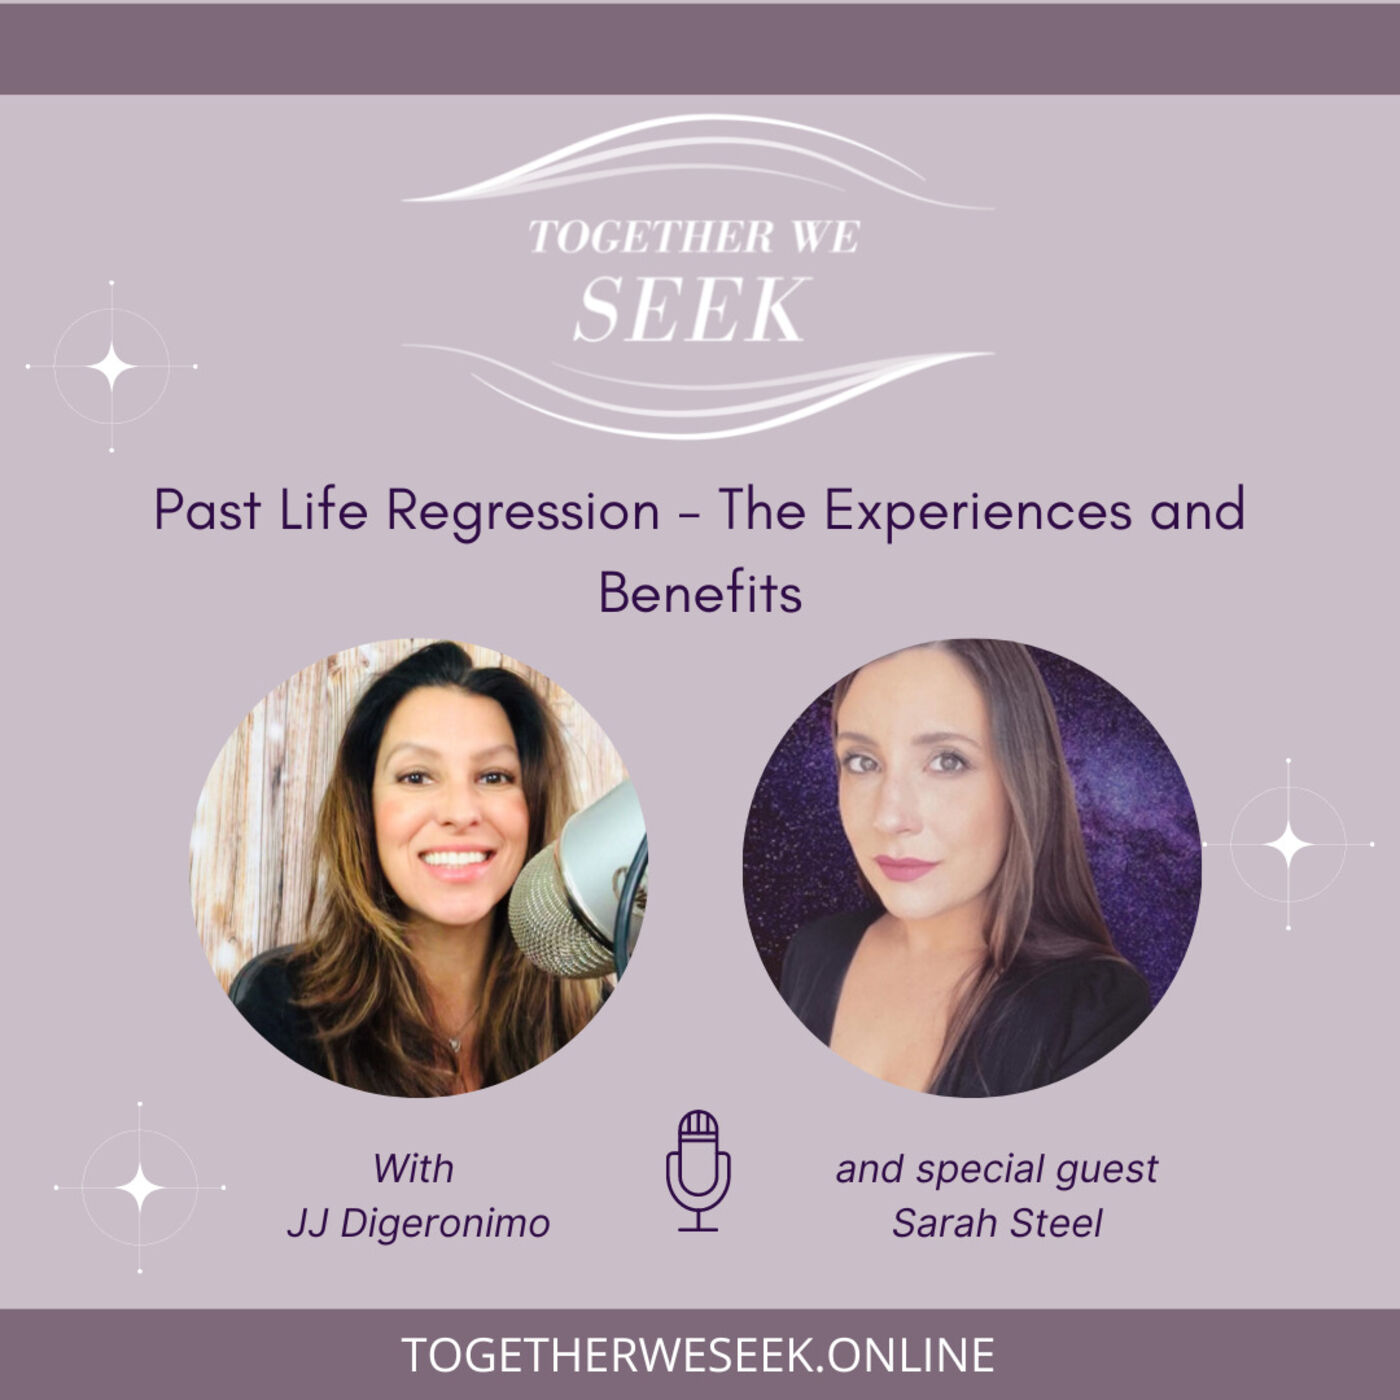 Past Life Regression – The Experience and Benefits with Sarah Steel